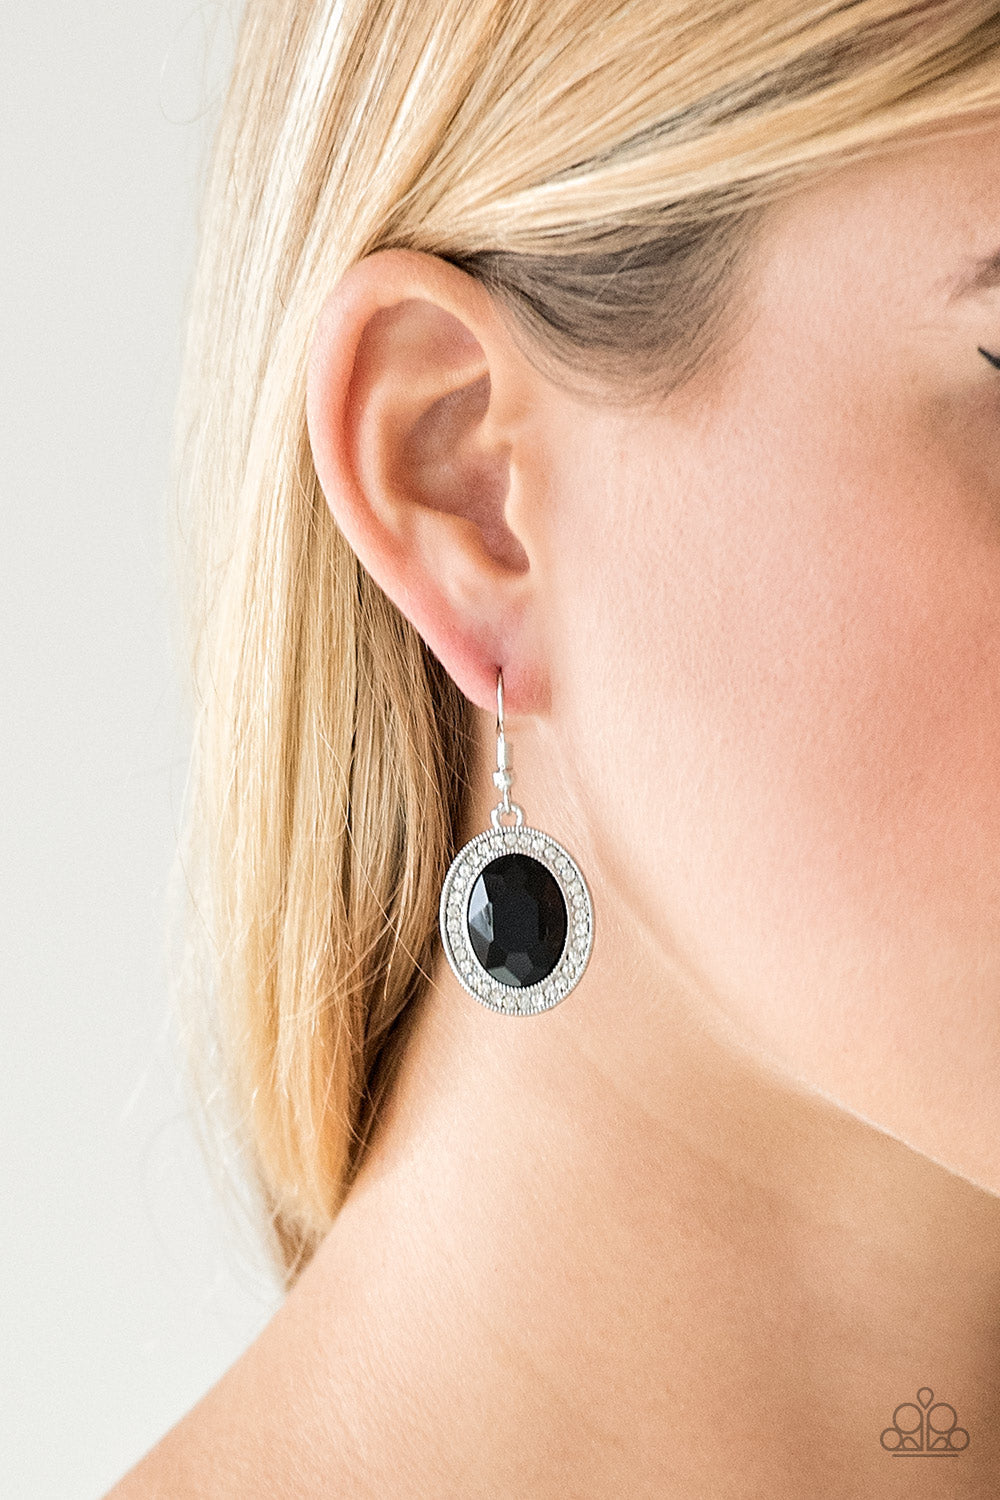 Paparazzi Only FAME In Town - Black Gem - Rhinestone Earrings - $5 Jewelry With Ashley Swint